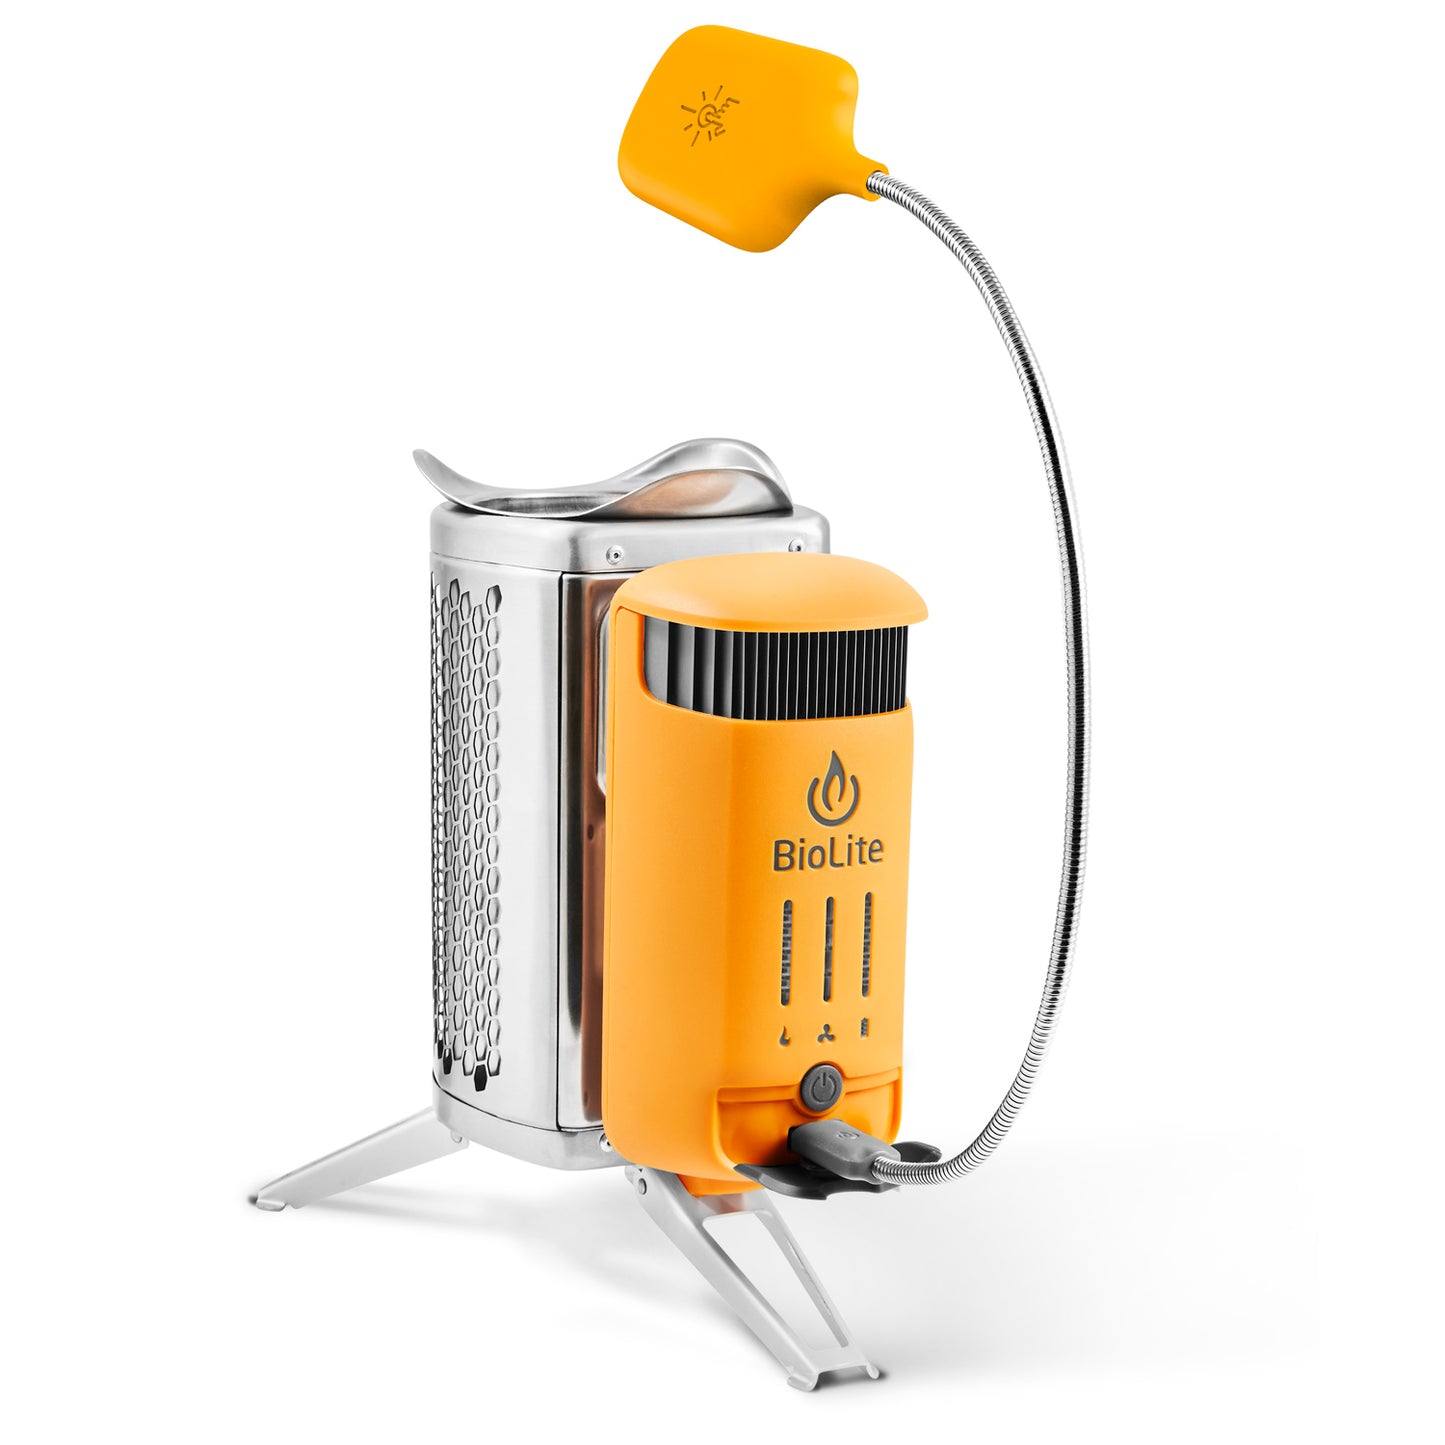 BioLite CampStove 2+ Convert Fire to Electricity